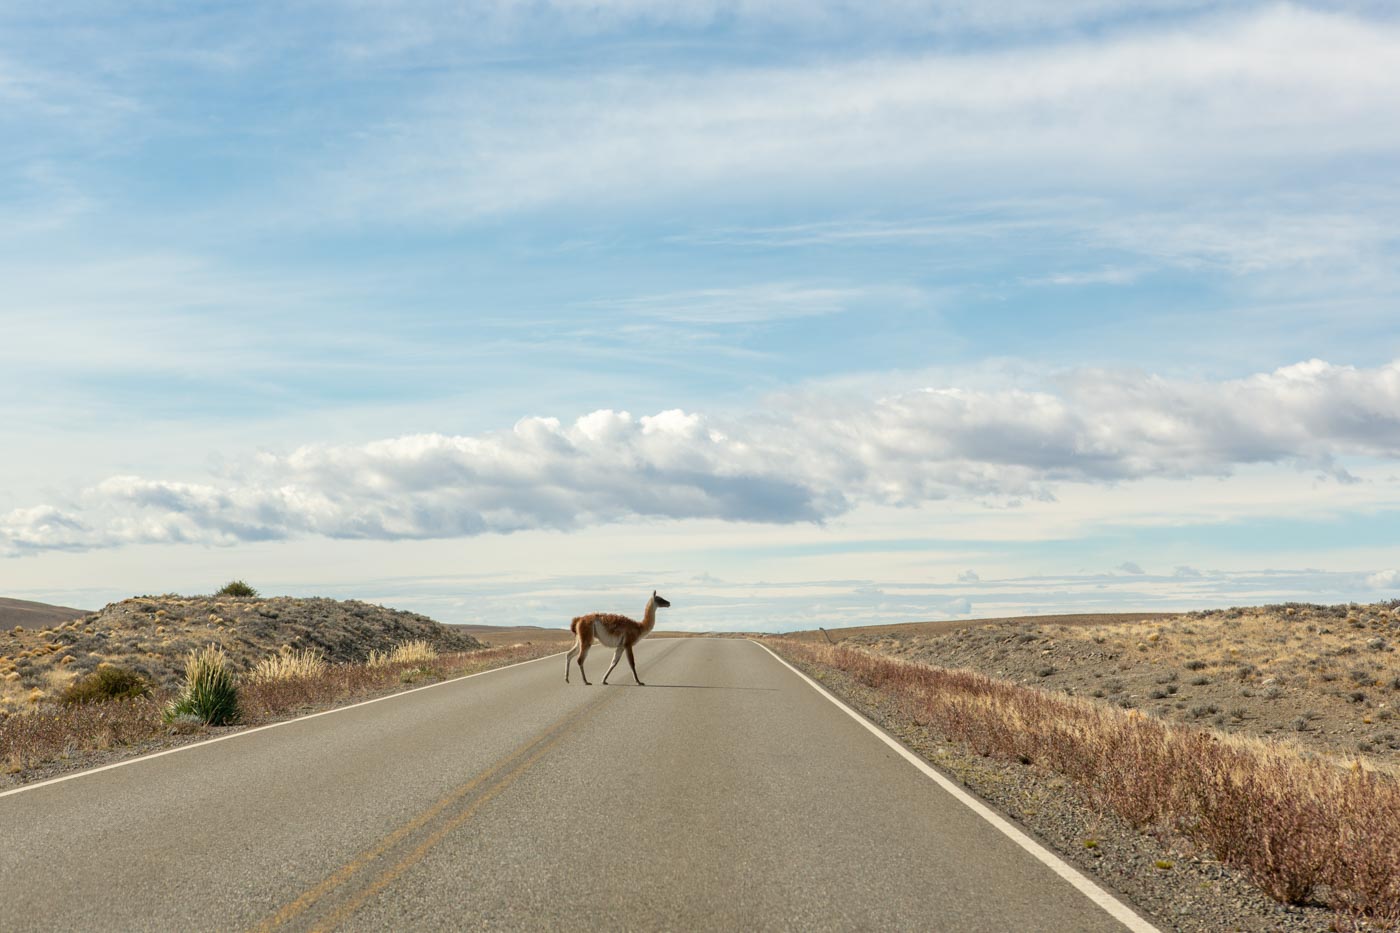 Guanaco on the road to El Calafate, Argentina.